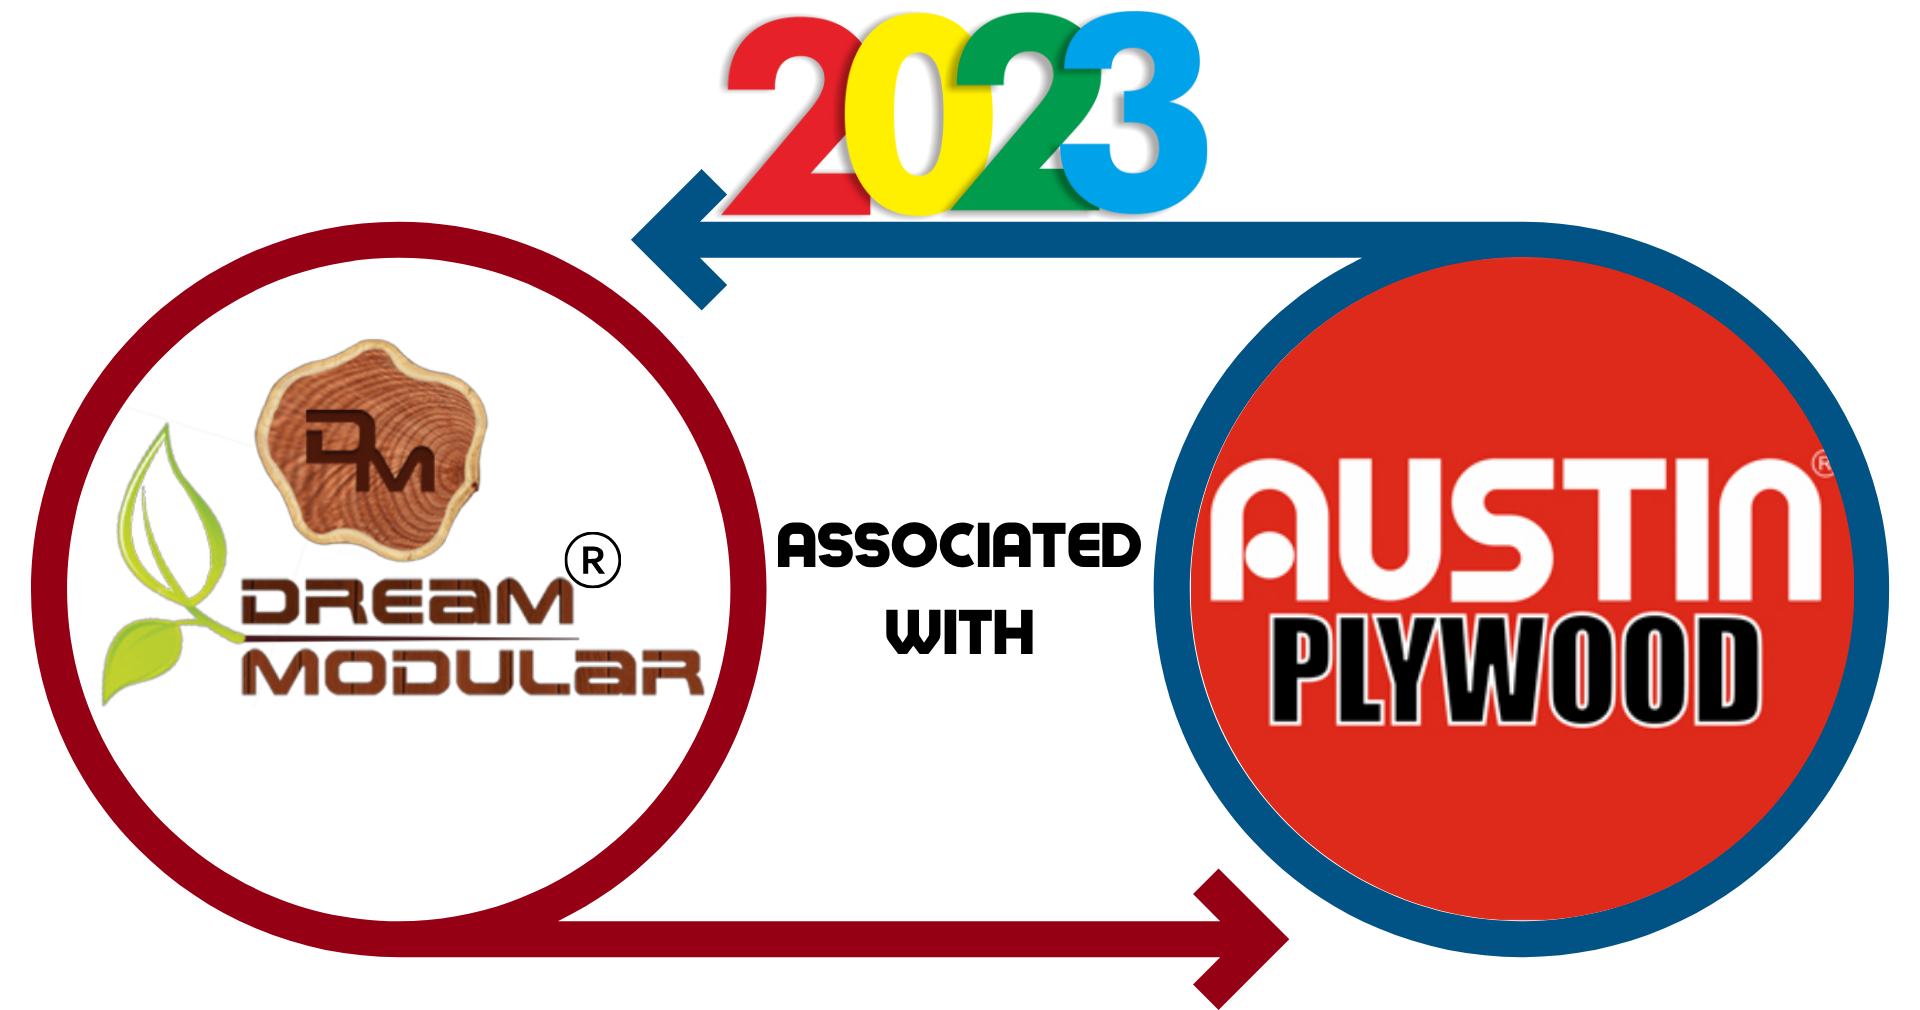 Associated with Austin Plywood. - 2023